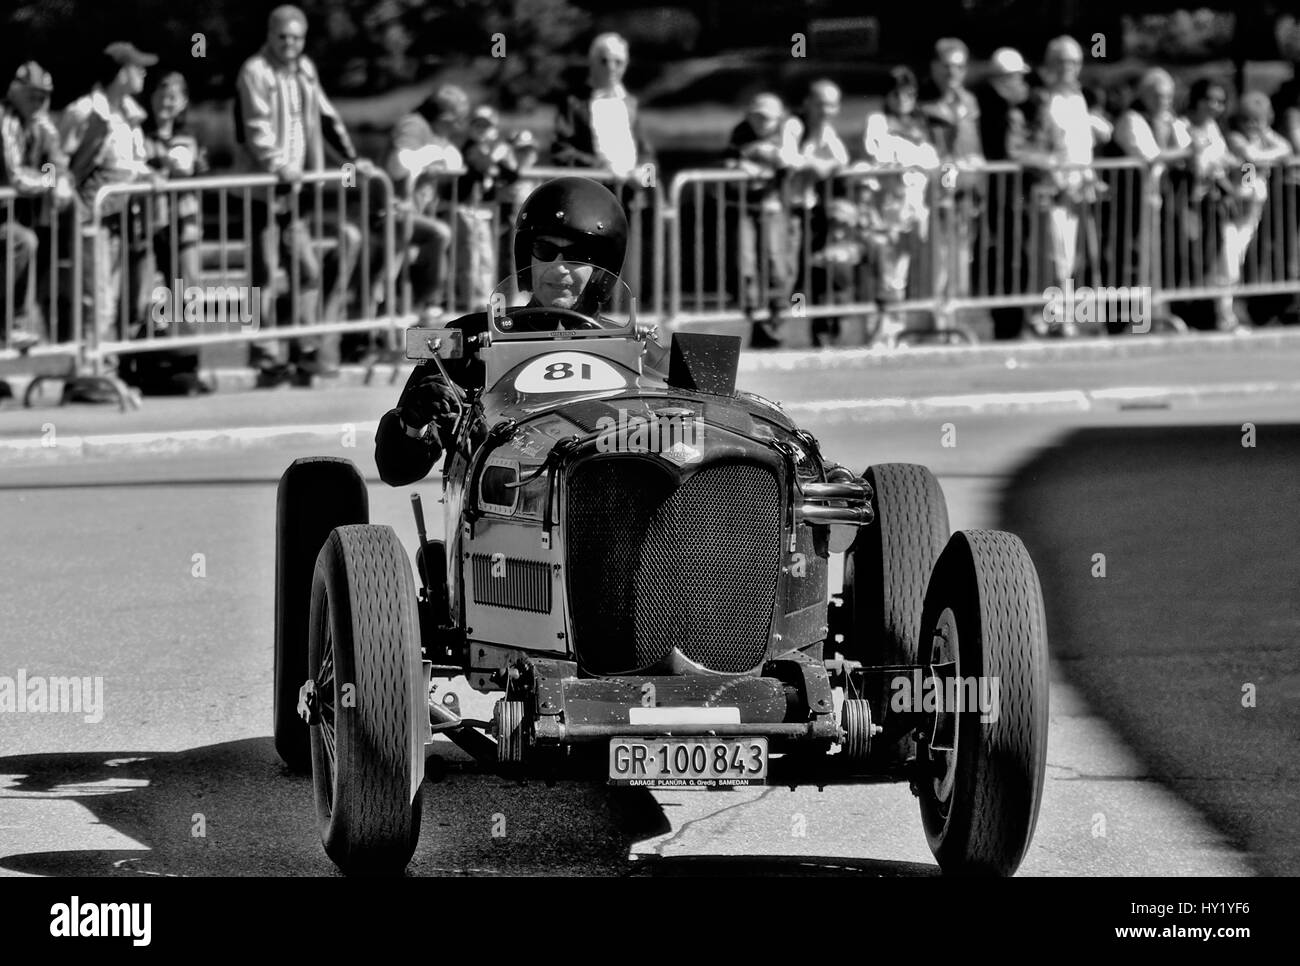 This black and white stock photo shows a vintage Riley vintage car racing during the Arosa Mountain Rally in Switzerland. The image was taken on a sli Stock Photo